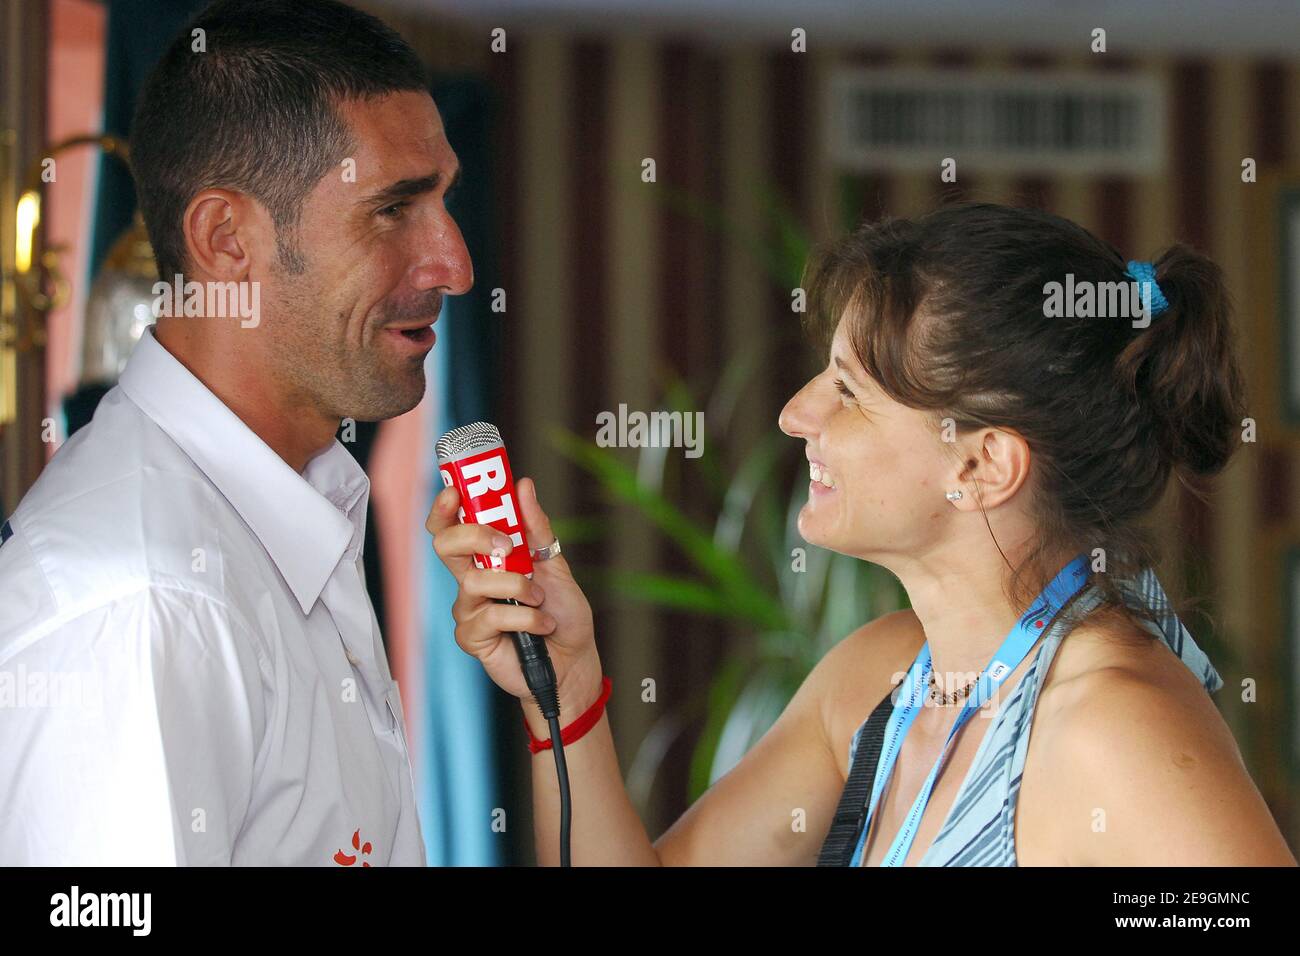 French former swimmer Roxana Maracineanu interviews French former swimmer Franck Esposito during the european swimming championships in Budapest, Hungary, on July 29, 2006. Photo by Nicolas Gouhier/Cameleon/ABACAPRESS.COM Stock Photo